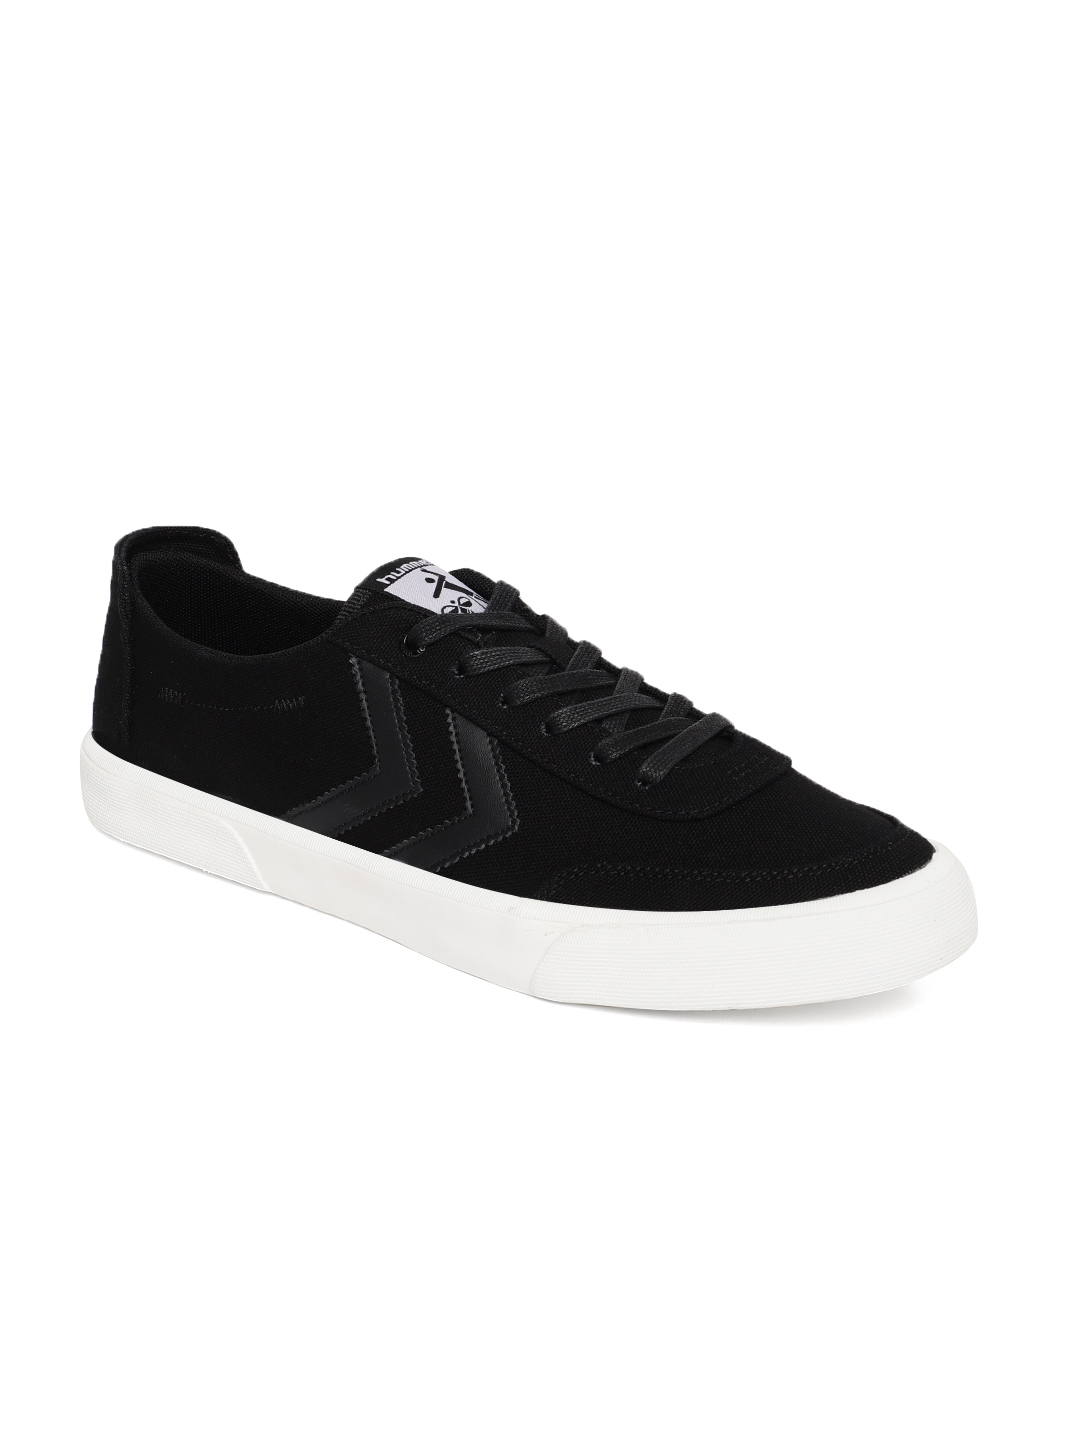 Buy Unisex Black STOCKHOLM Sneakers - Casual Shoes for Unisex | Myntra